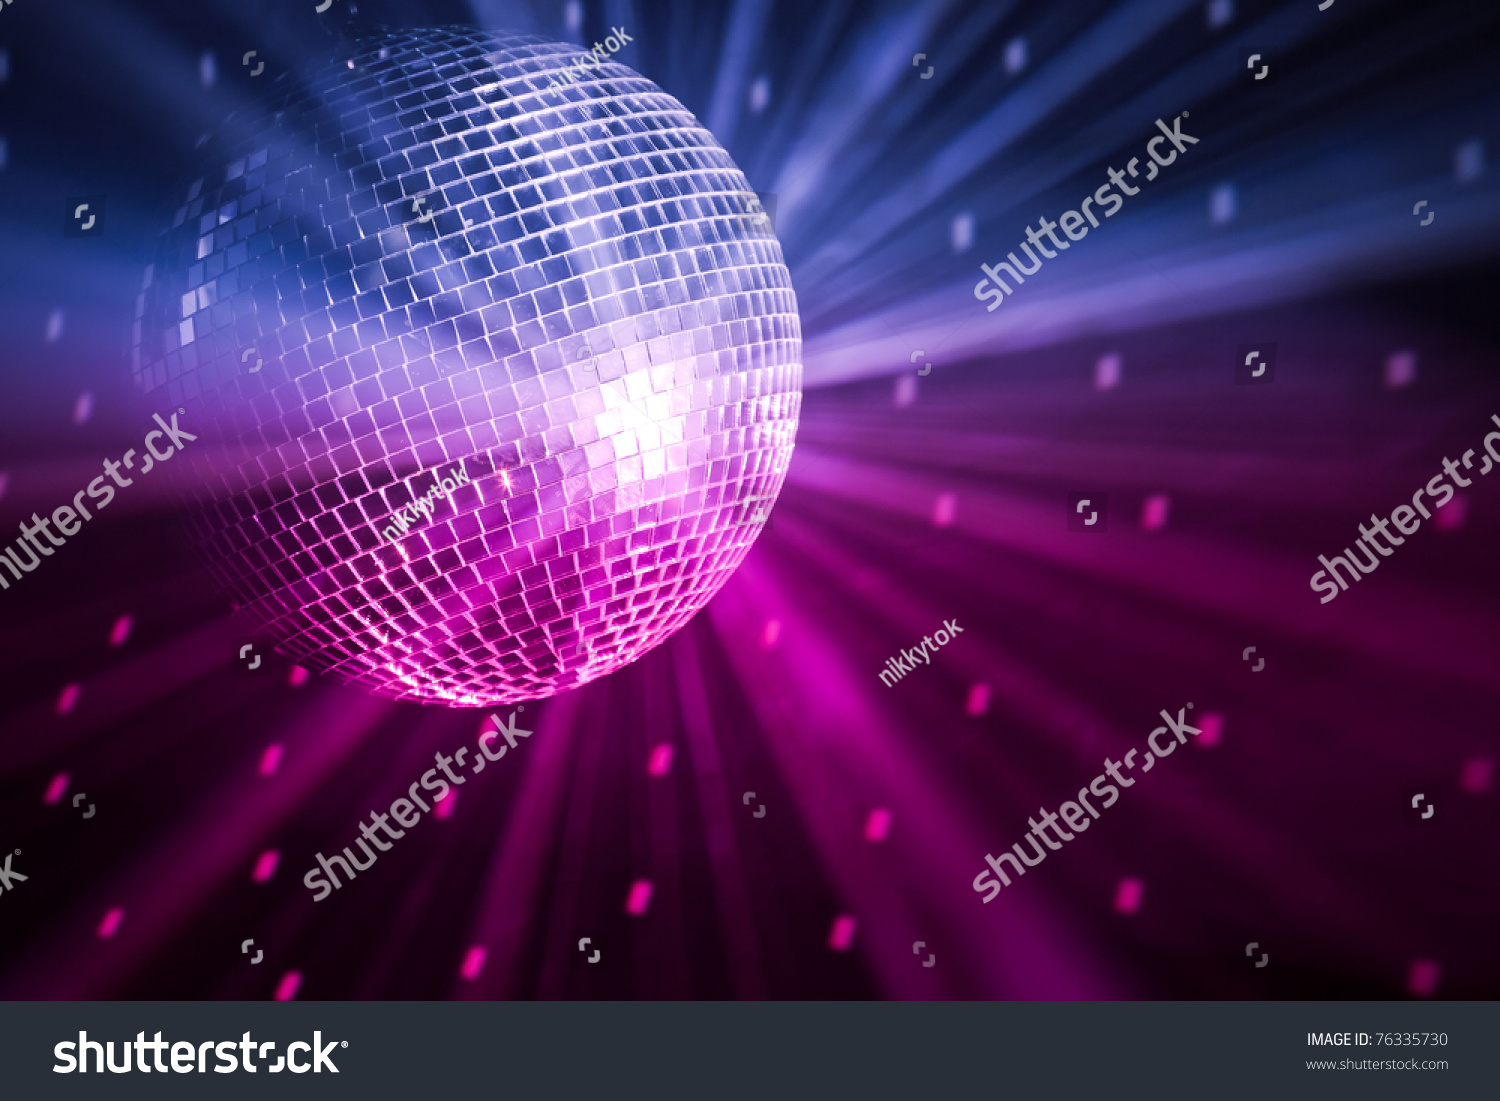 Party Lights Stock Photo 76335730 | Shutterstock